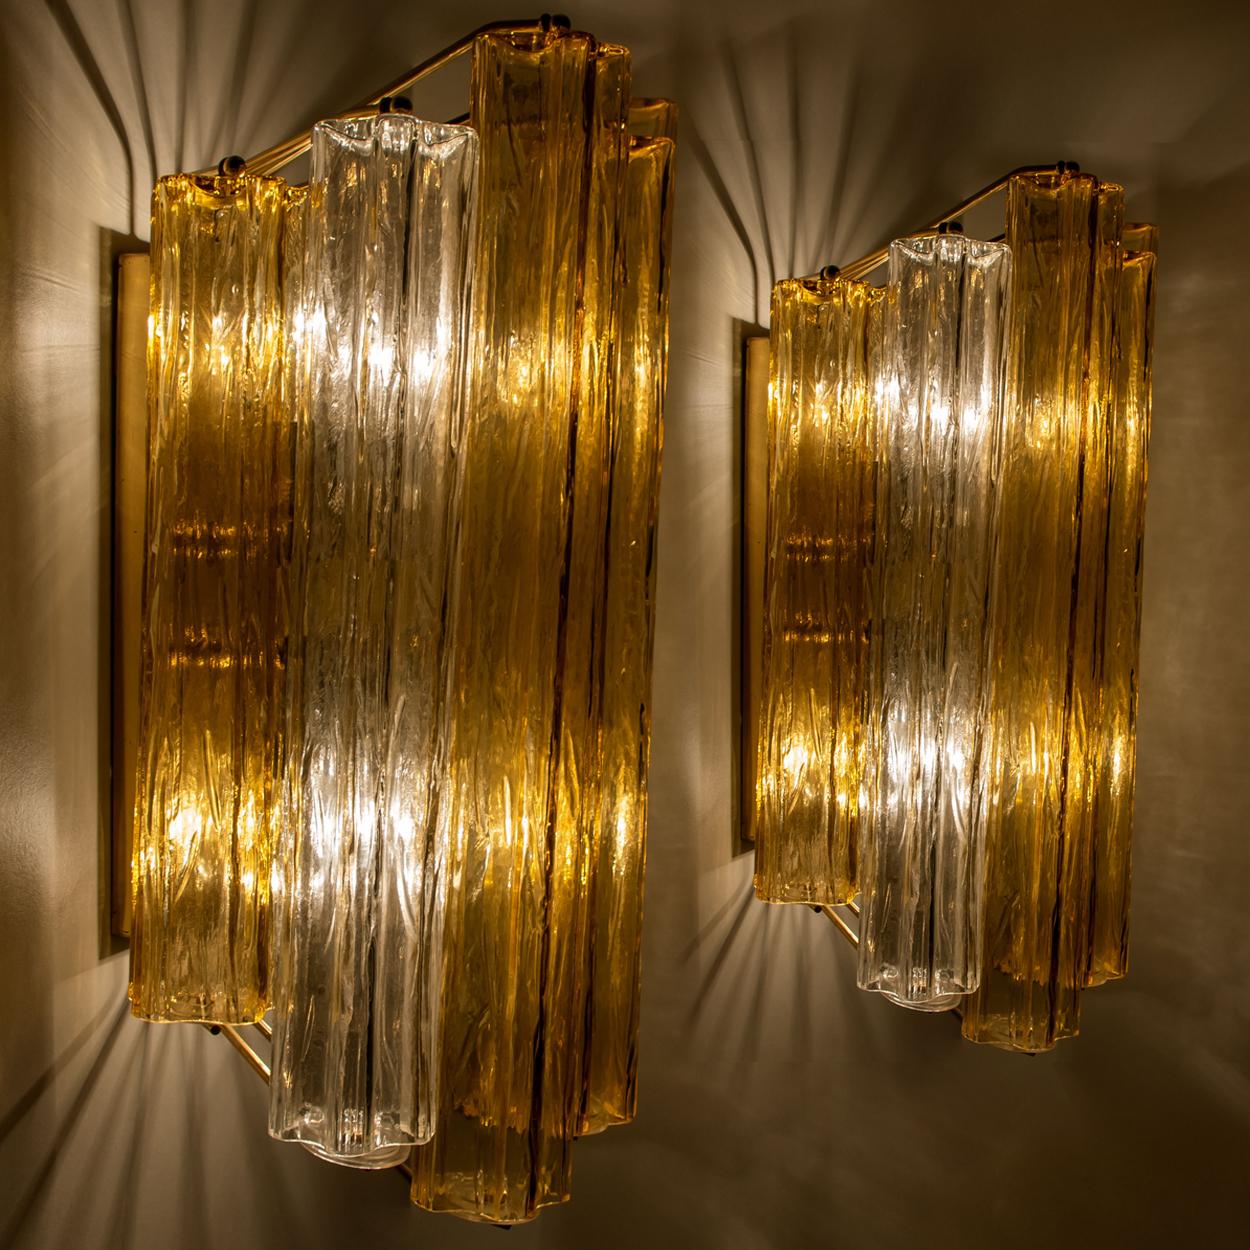 1 of the 2 Extra Large Wall Sconces or Wall Lights Murano Glass, Barovier & Toso 2